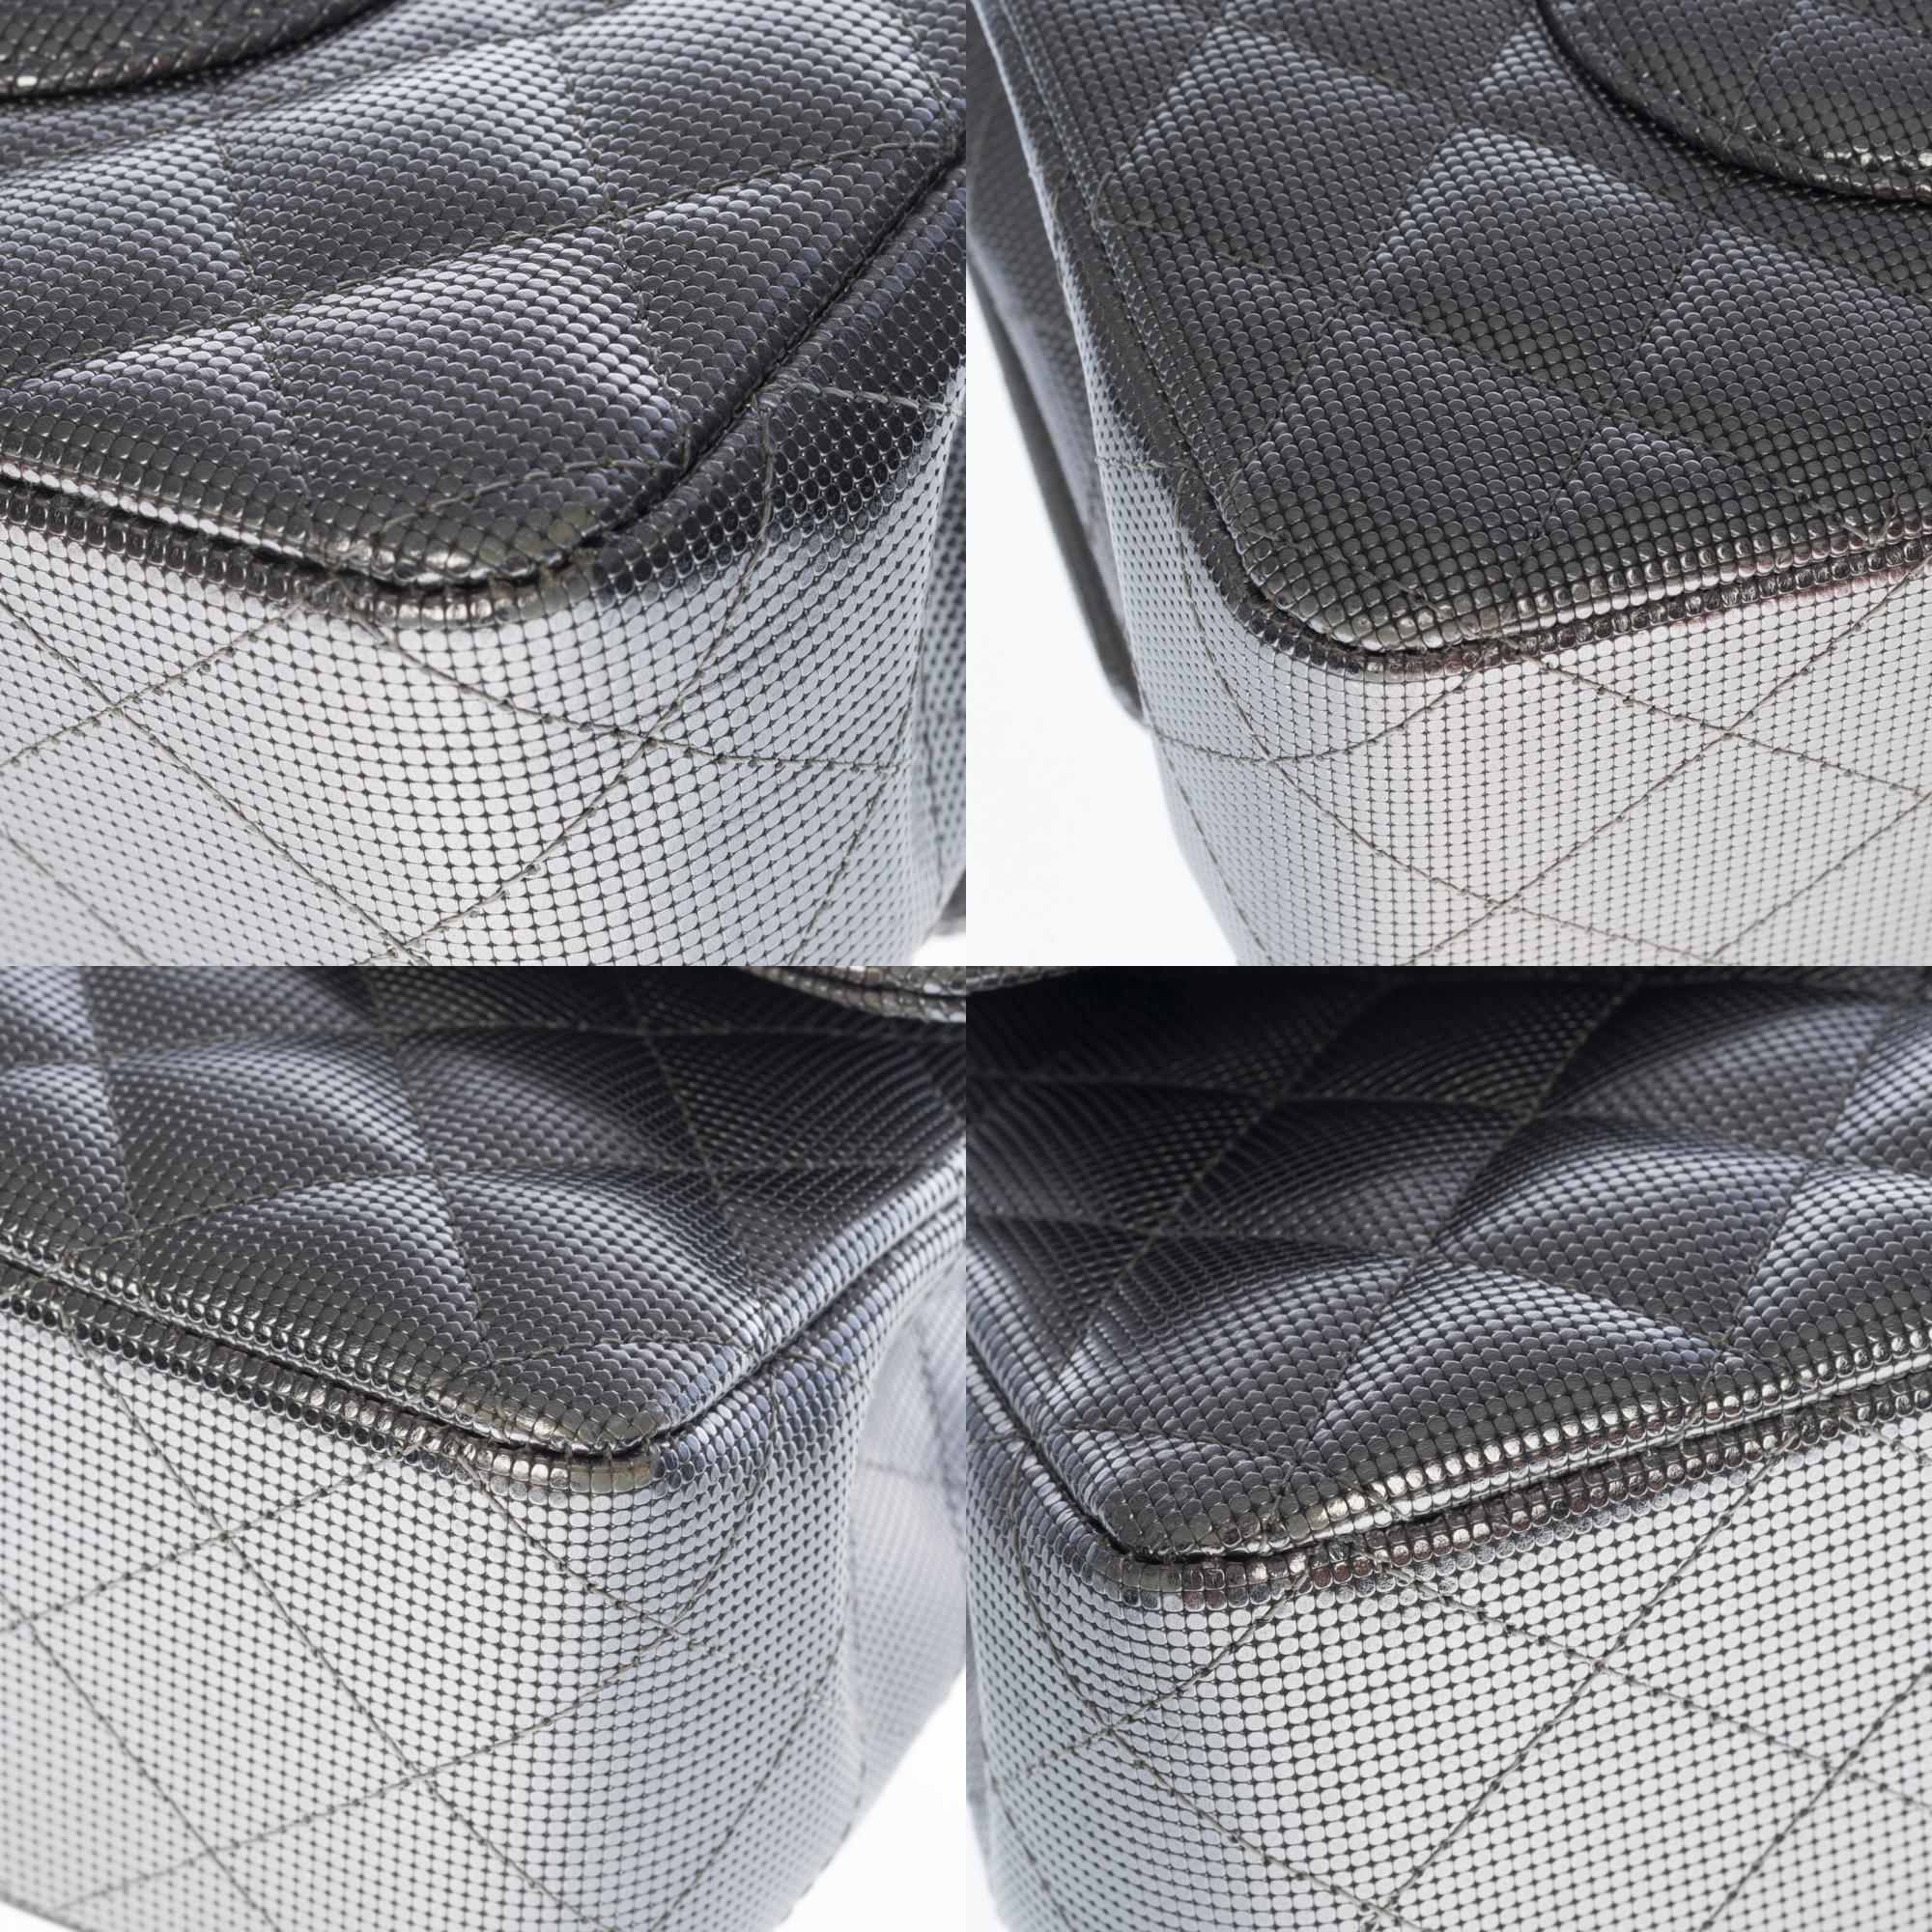 Chanel Timeless double flap Shoulder bag in Silver Metal quilted leather, SHW 6